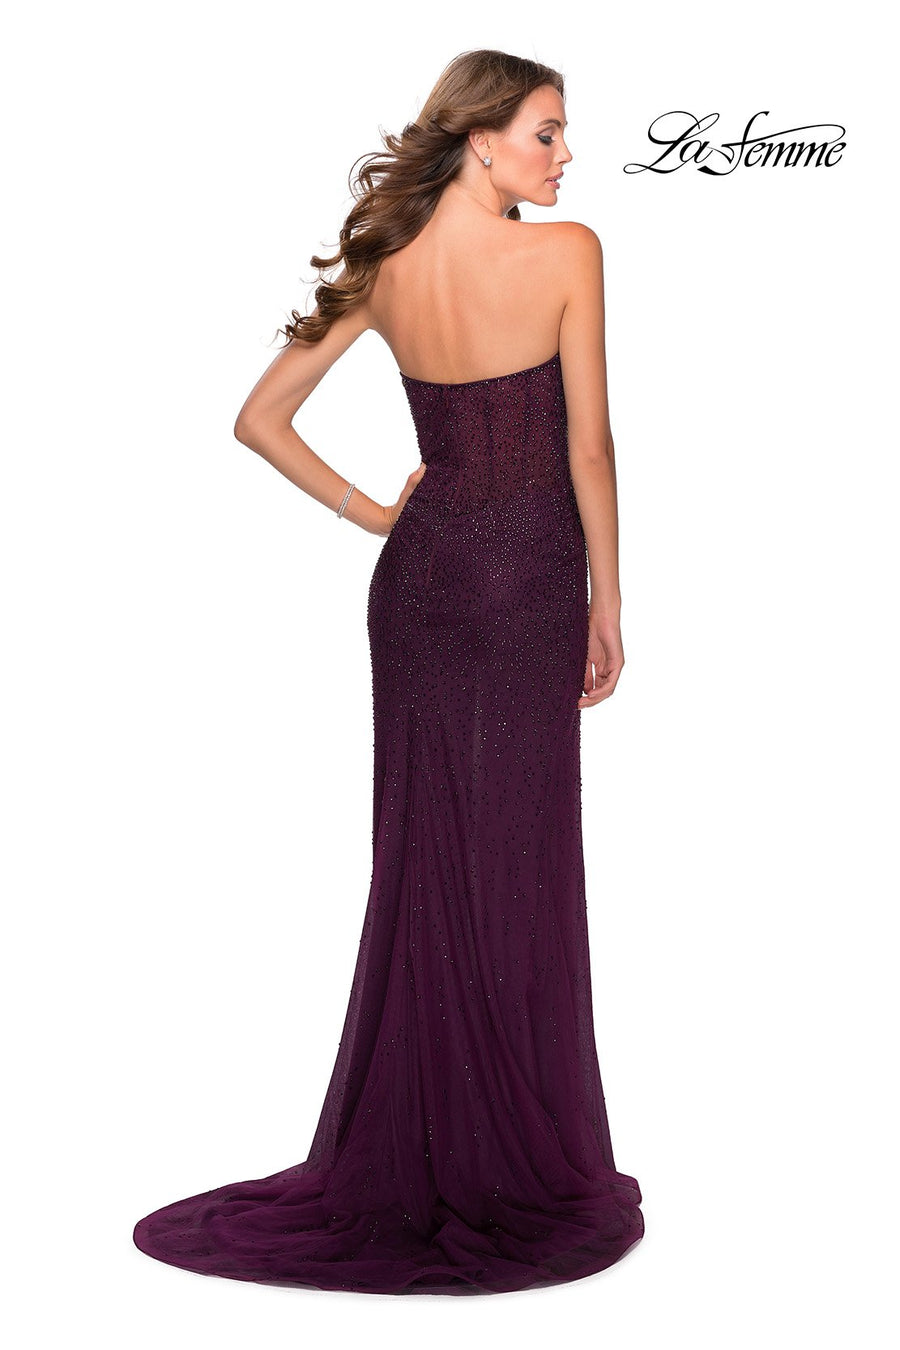 La Femme 28621 prom dress images.  La Femme 28621 is available in these colors: Dark Berry, Emerald, Navy.